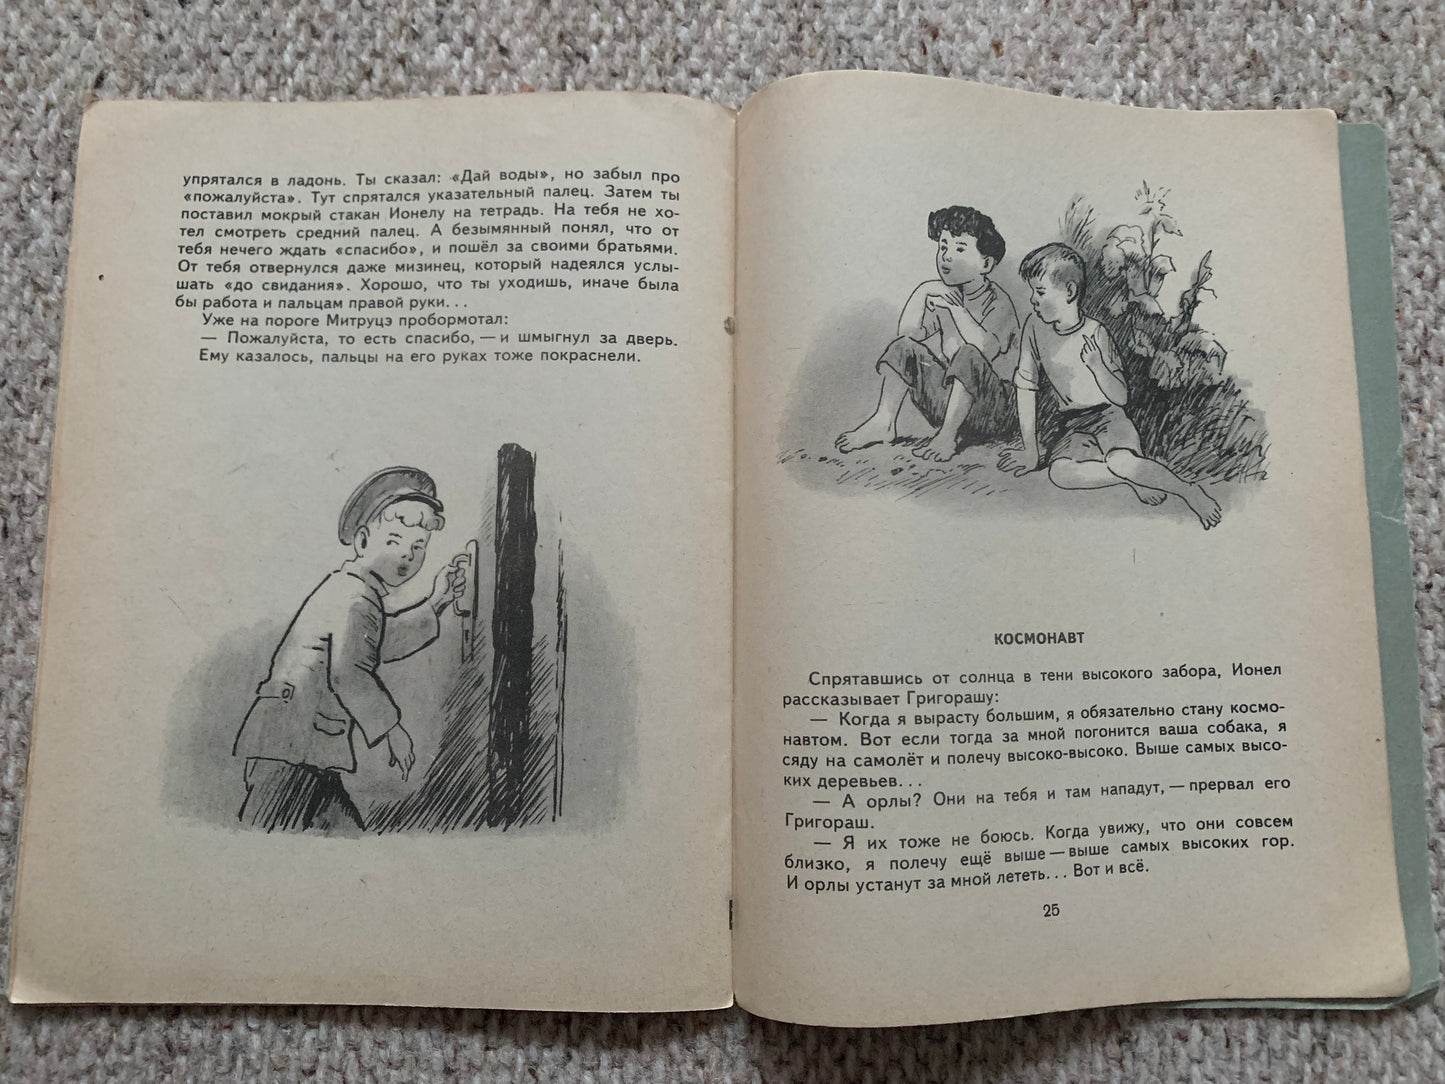 Vintage Russian Children's Book by M.Zoref - SEVEN AND SEVEN MAKES TWELVE - Stories - Printed in USSR - 1968